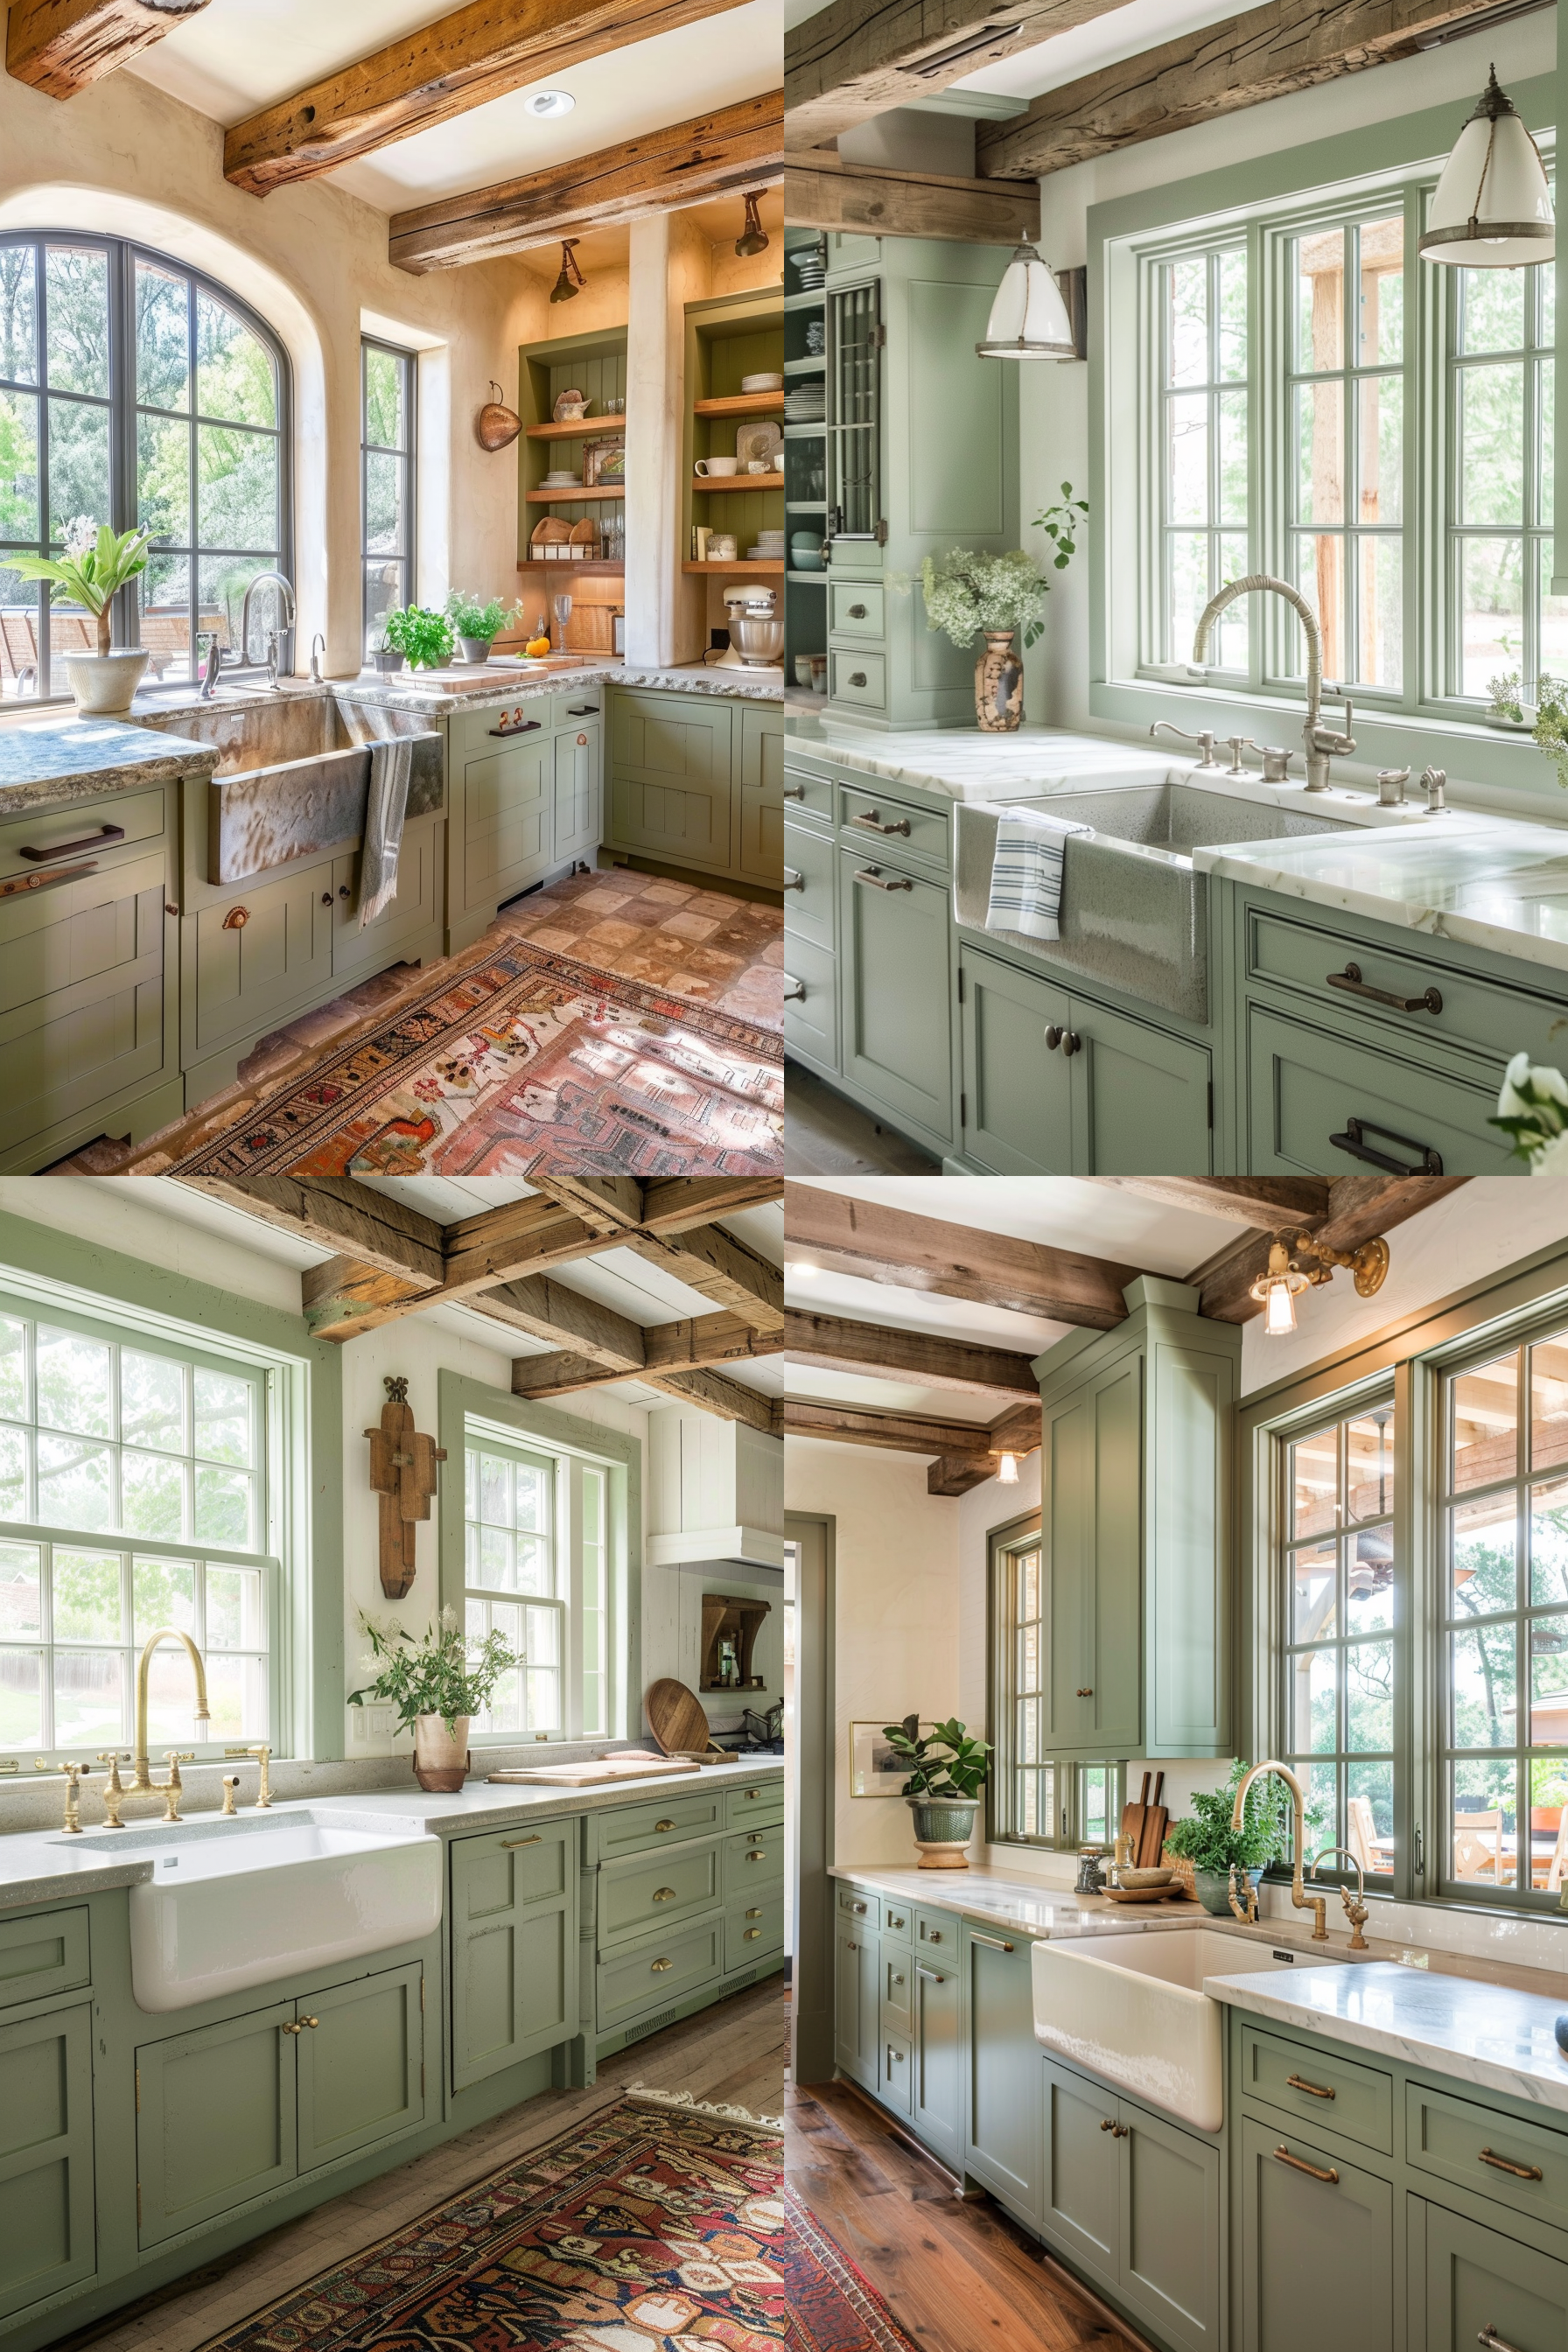 Four images of a cozy kitchen with green cabinetry, wood beams, large windows, and terracotta tiles, showcasing rustic elegance.